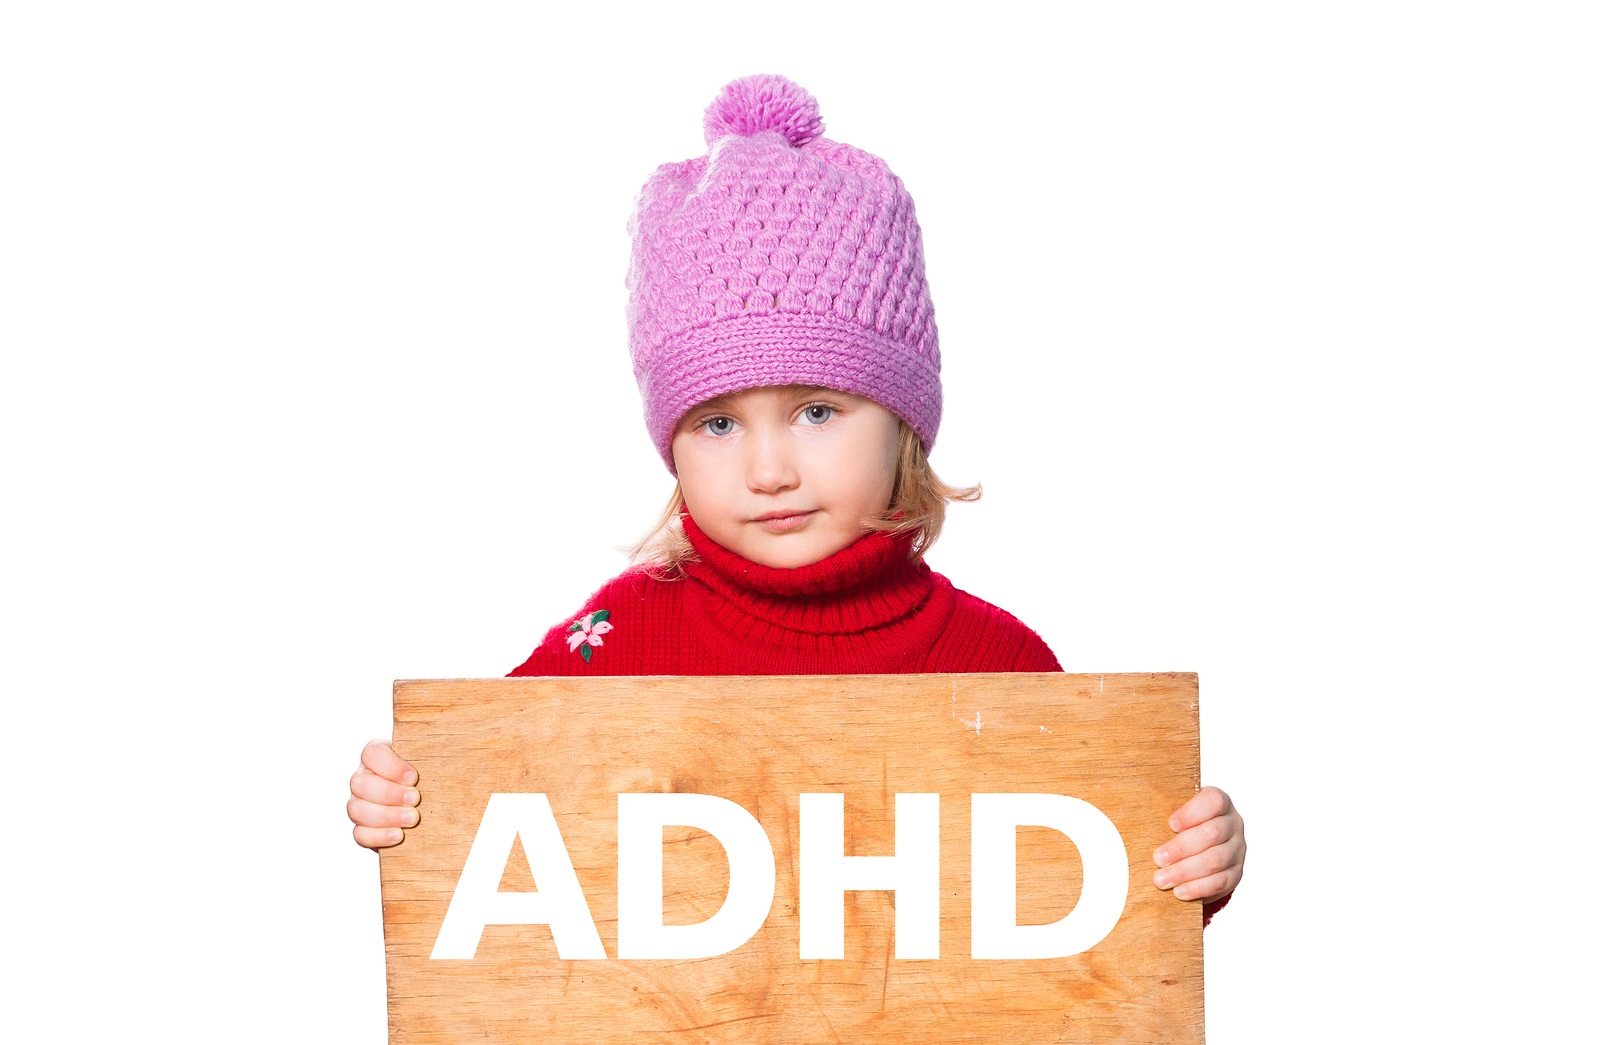 Obesity in women may be related to ADHD in girls